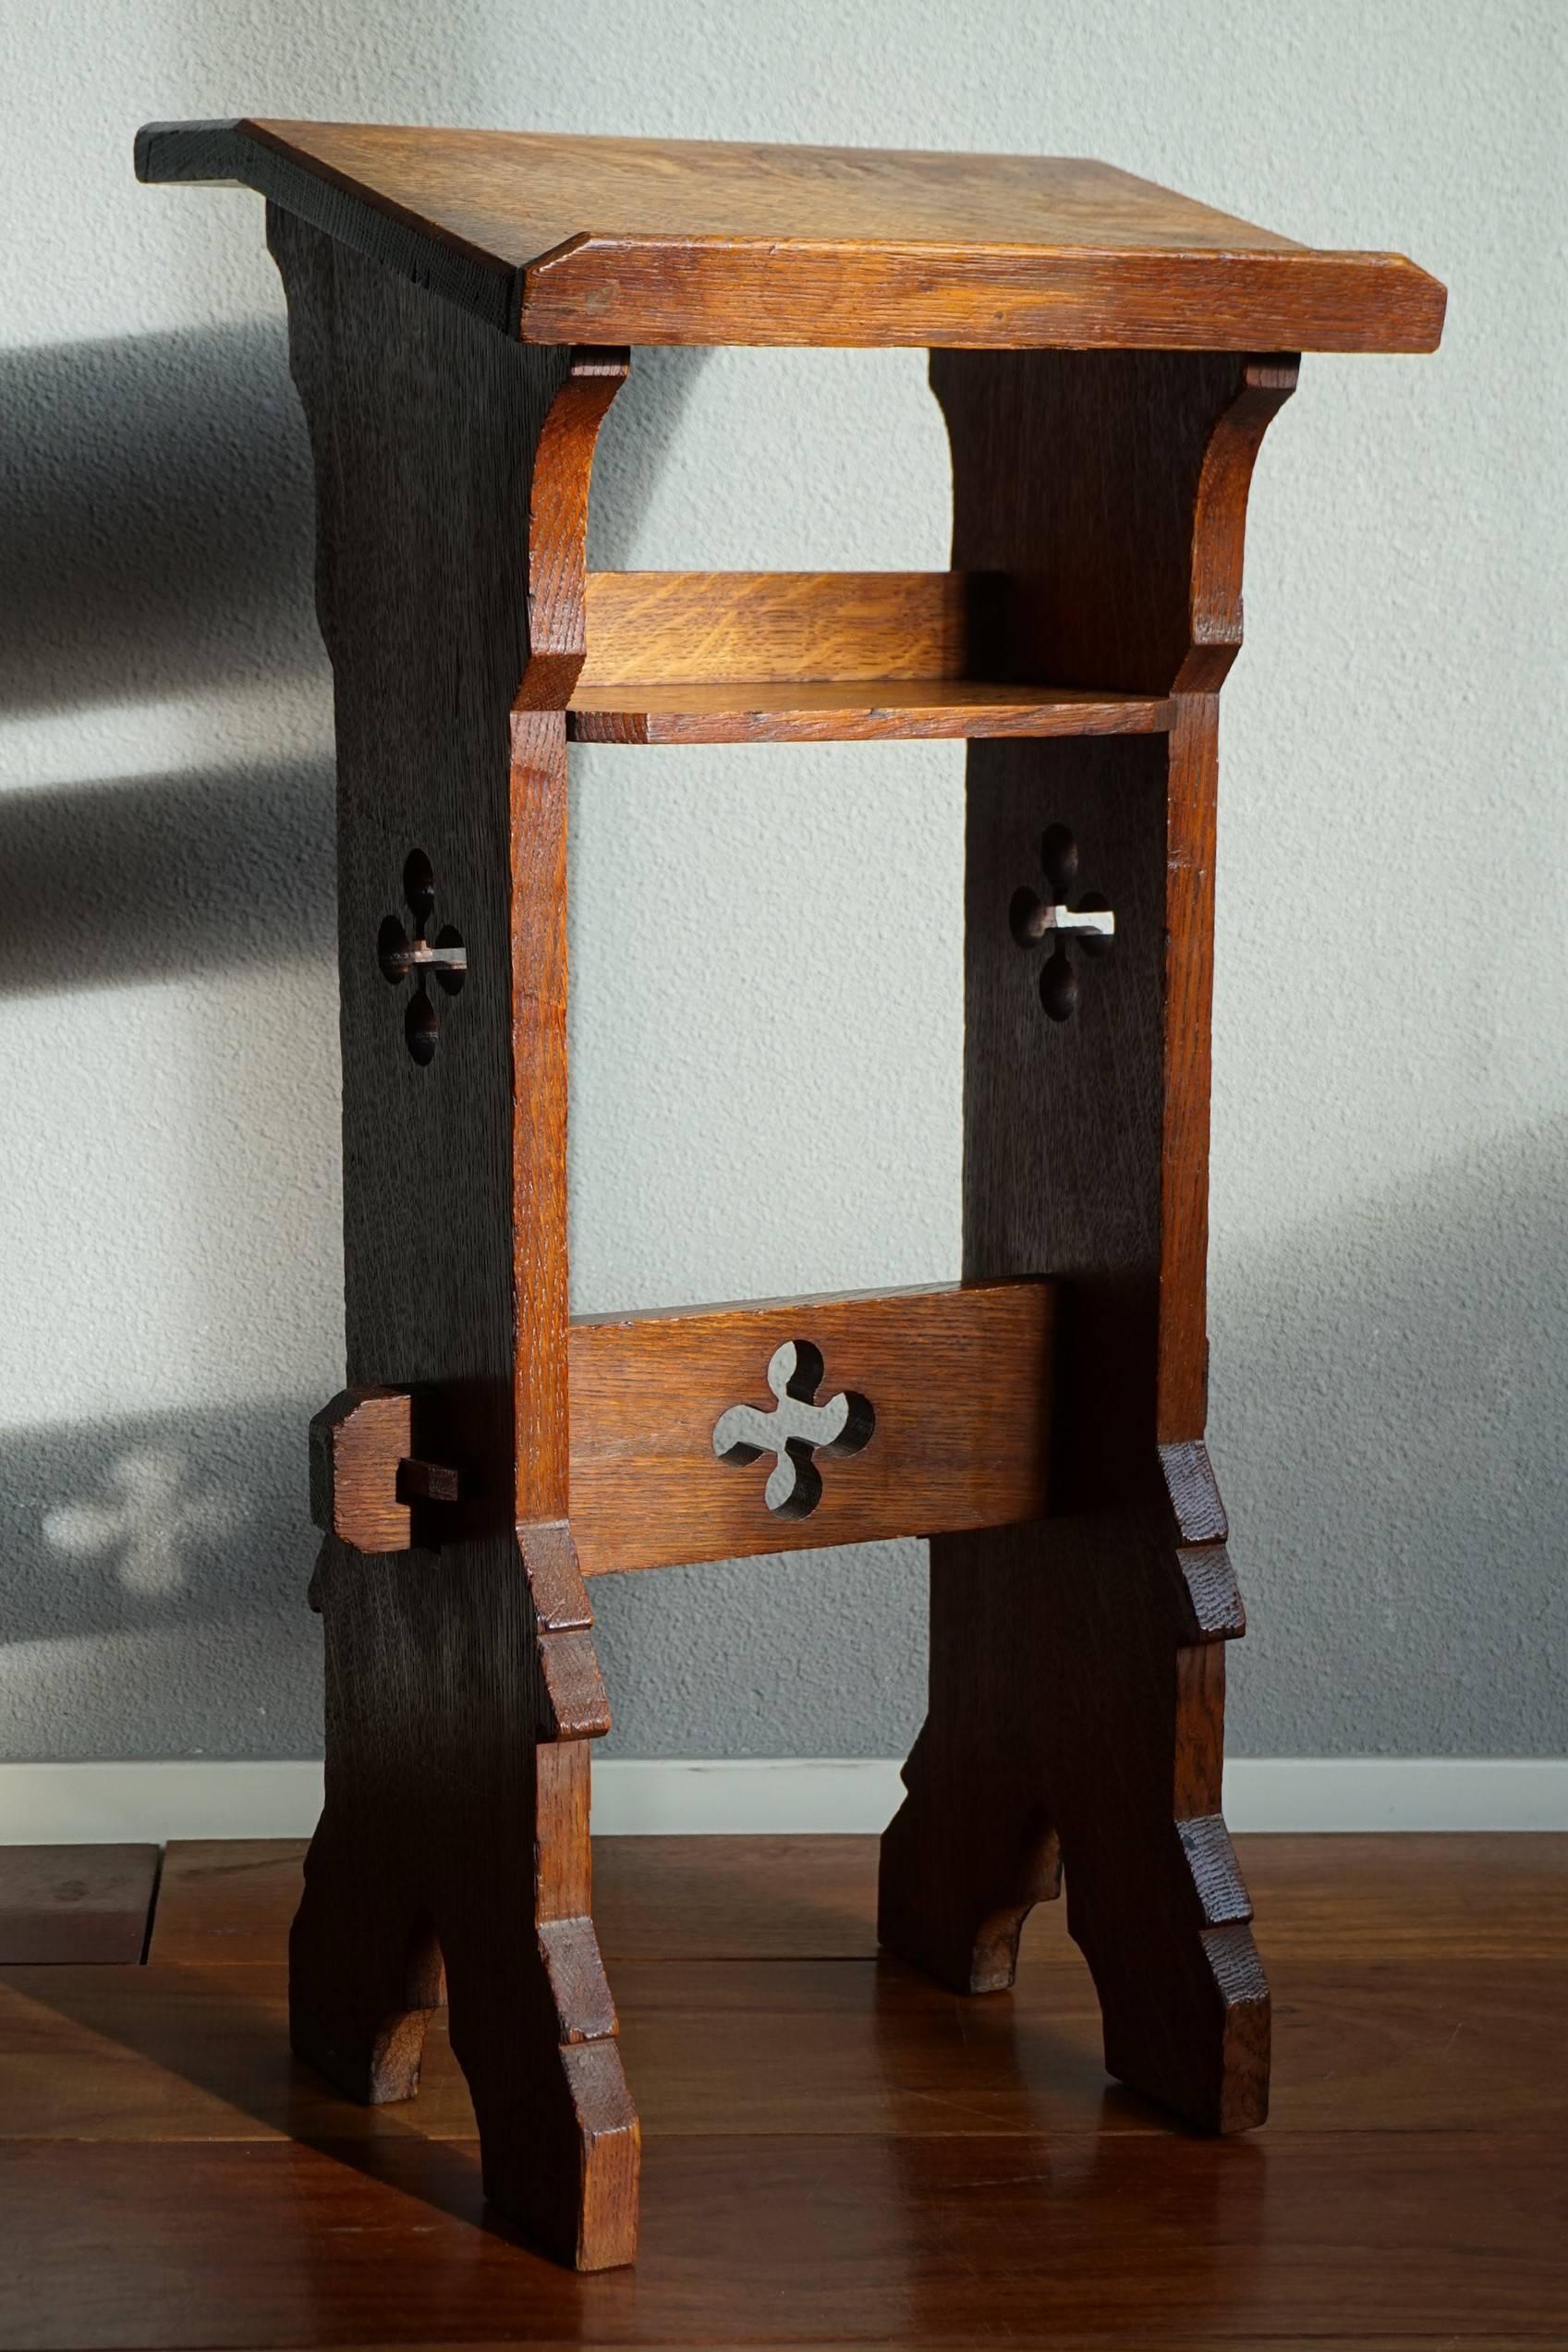 Hand-Crafted Oak Gothic Revival Bible or Book Stand for Children or for Kneeling or Sitting